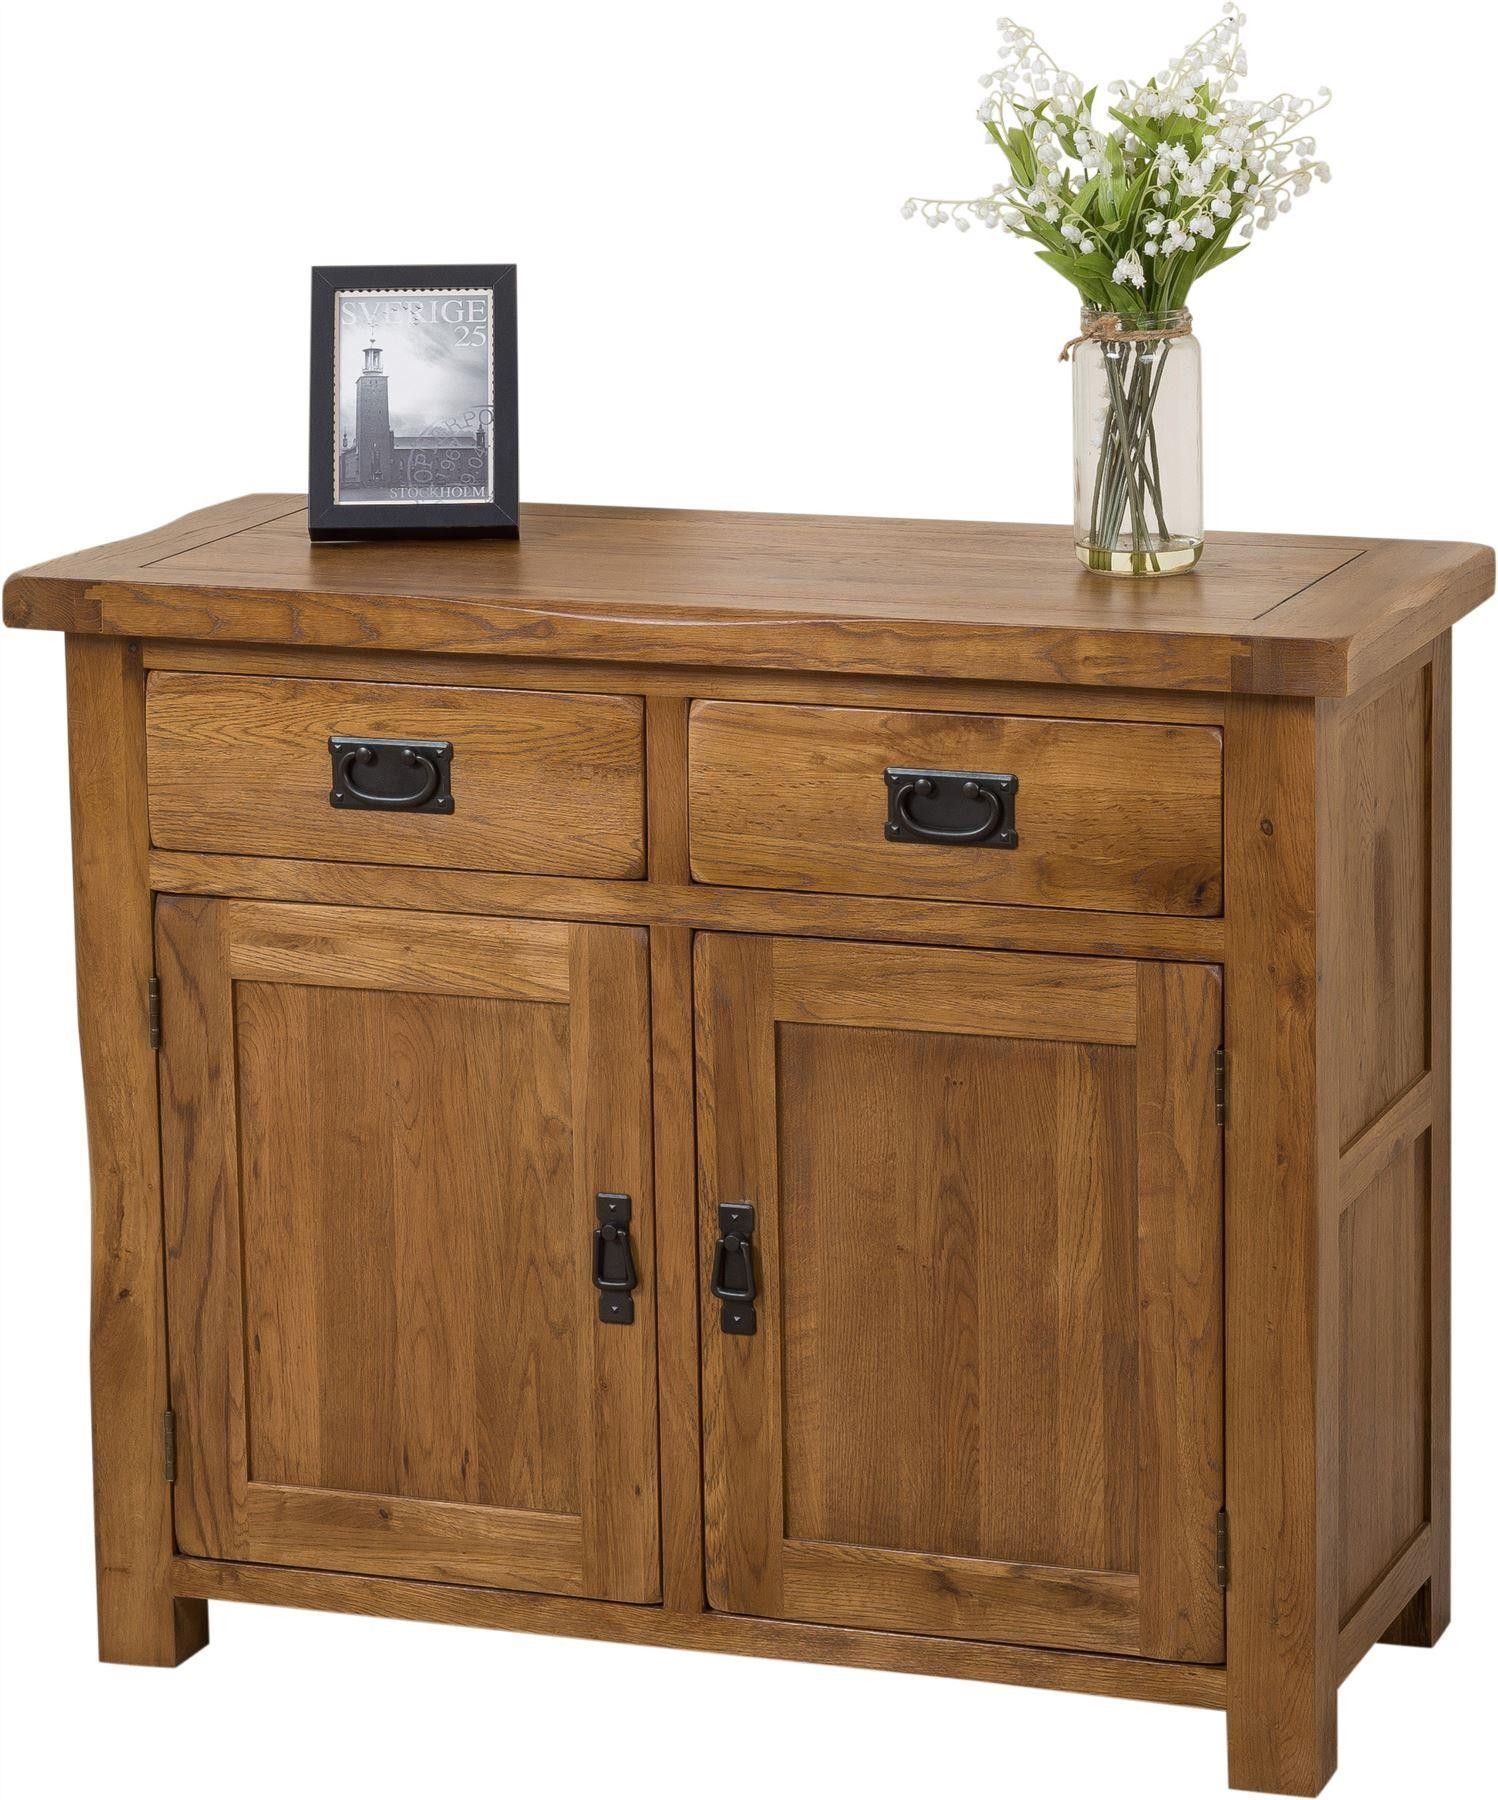 Cotswold Rustic Small Oak Sideboard | Modern Furniture Direct For Most Up To Date Rustic Oak Sideboards (Photo 7 of 15)